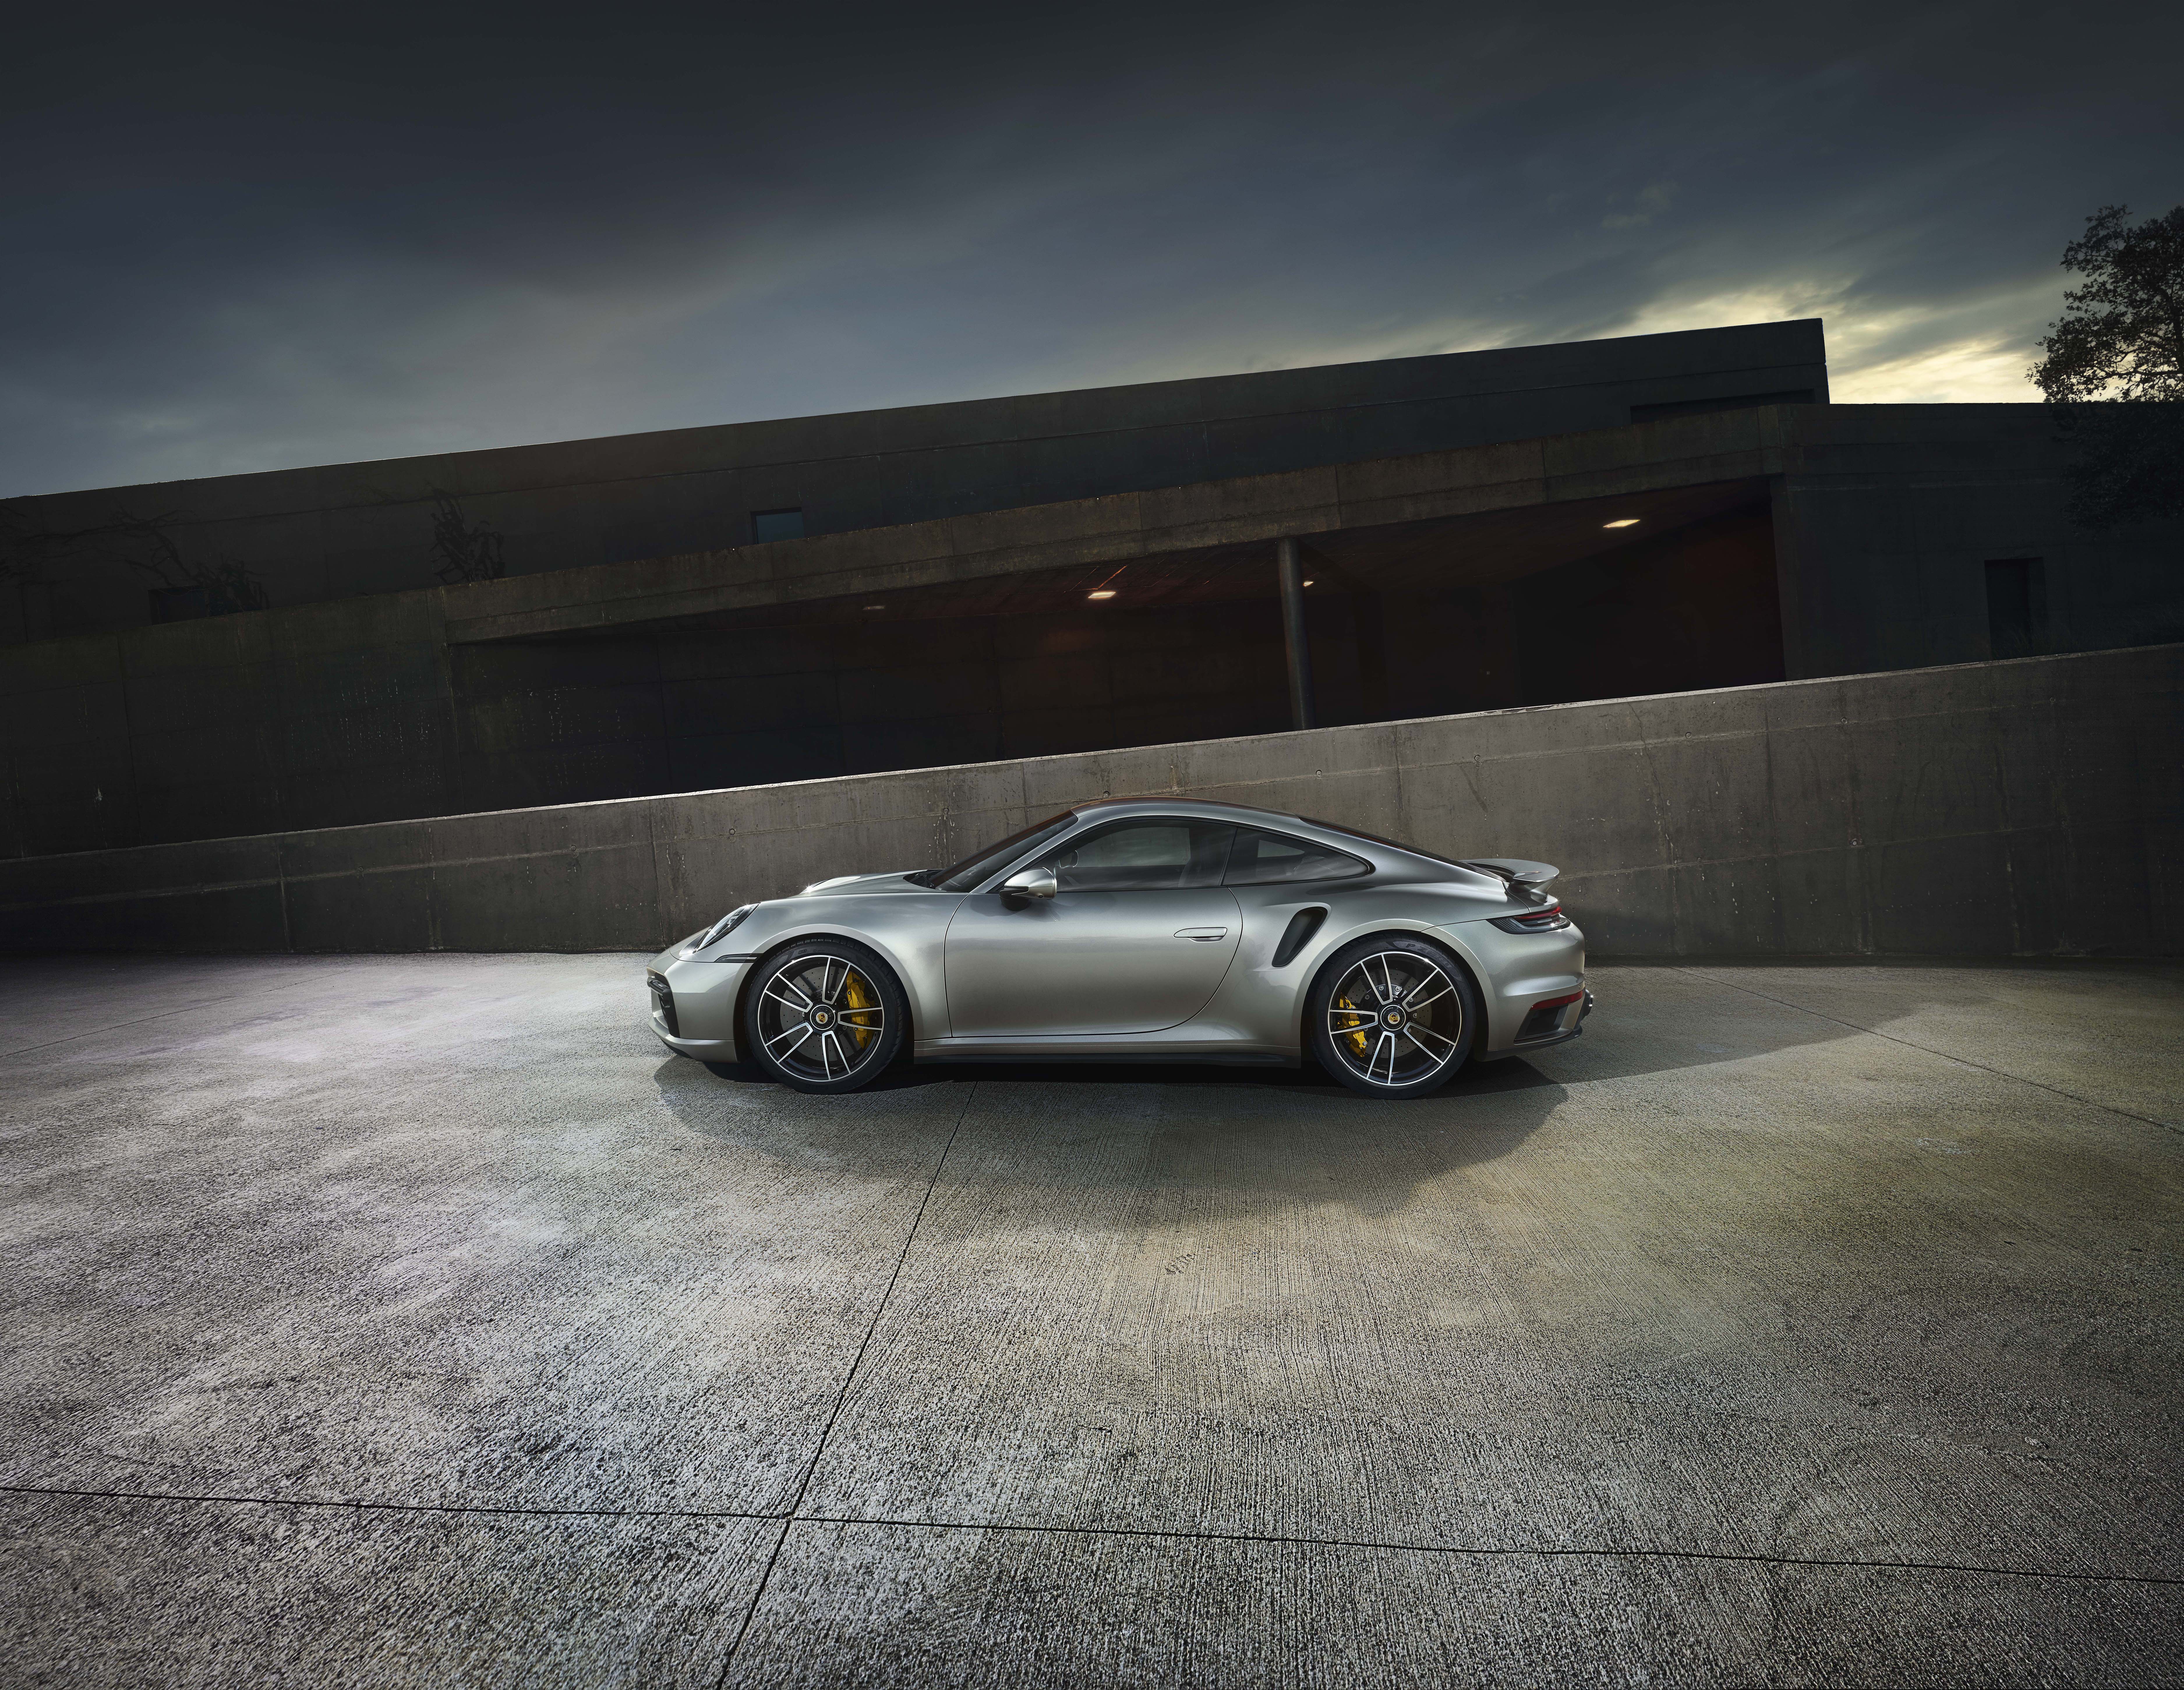 Silver Porsche 911 Turbo S (type 992) by modernist buildings